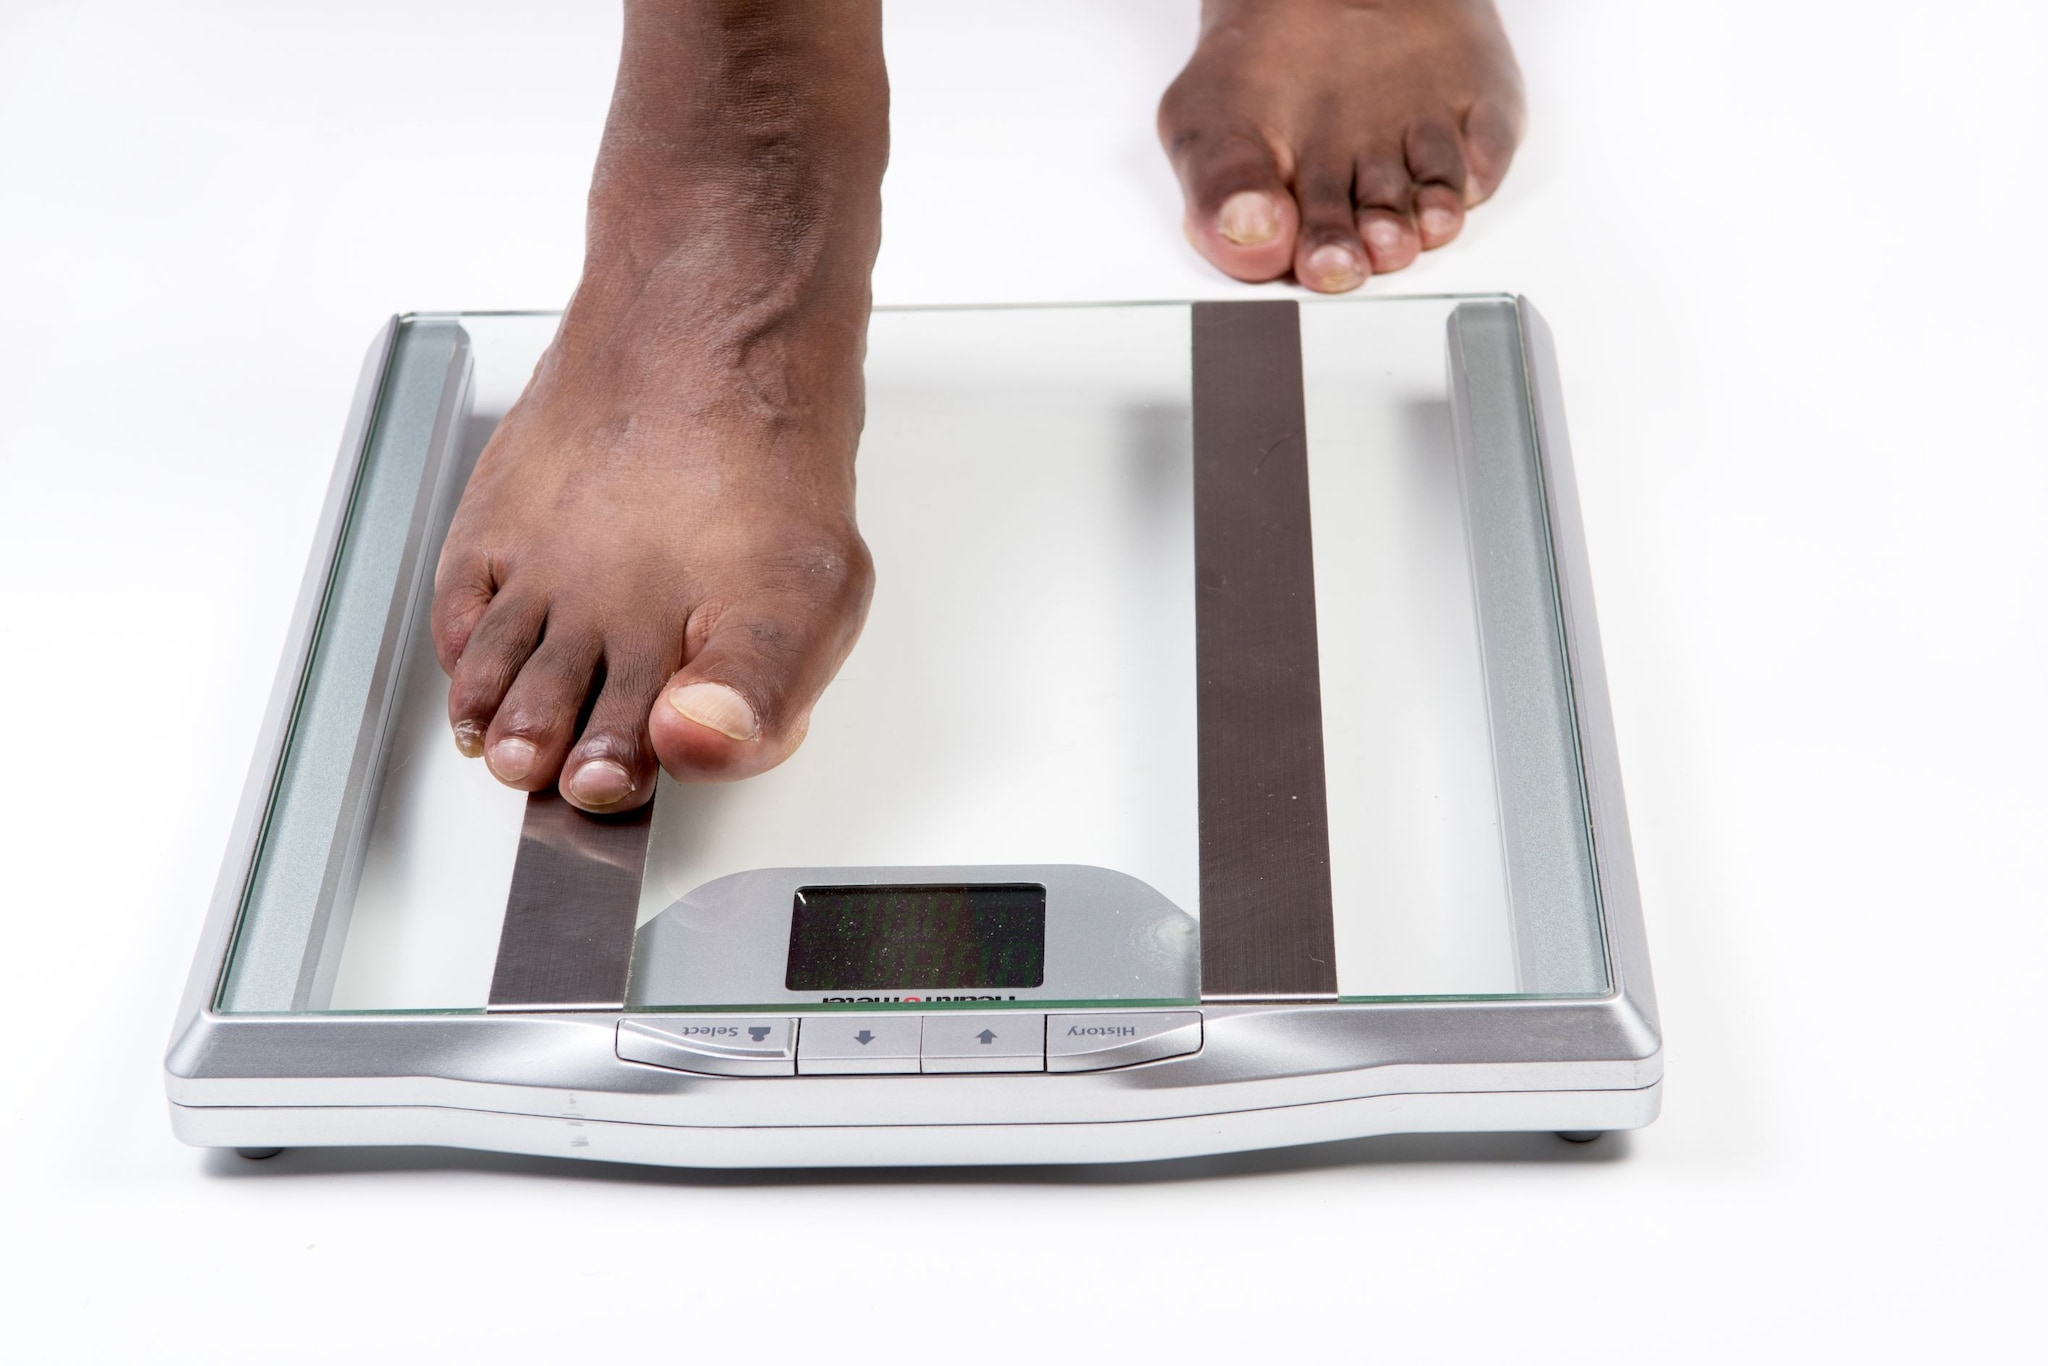 https://www.cdc.gov/healthyweight/images/AA-male-stepping-on-scales.jpg?_=93634